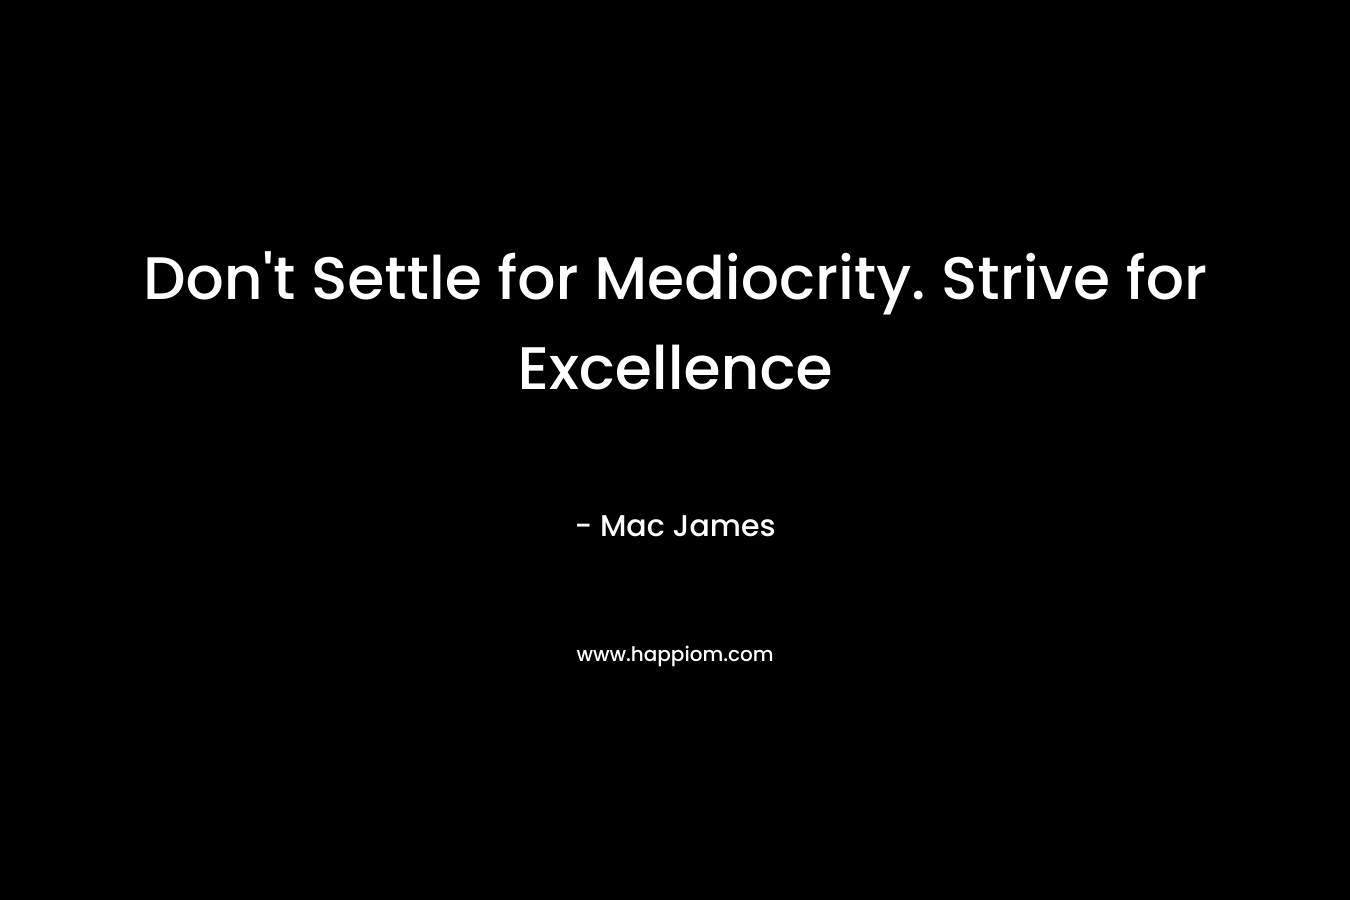 Don't Settle for Mediocrity. Strive for Excellence